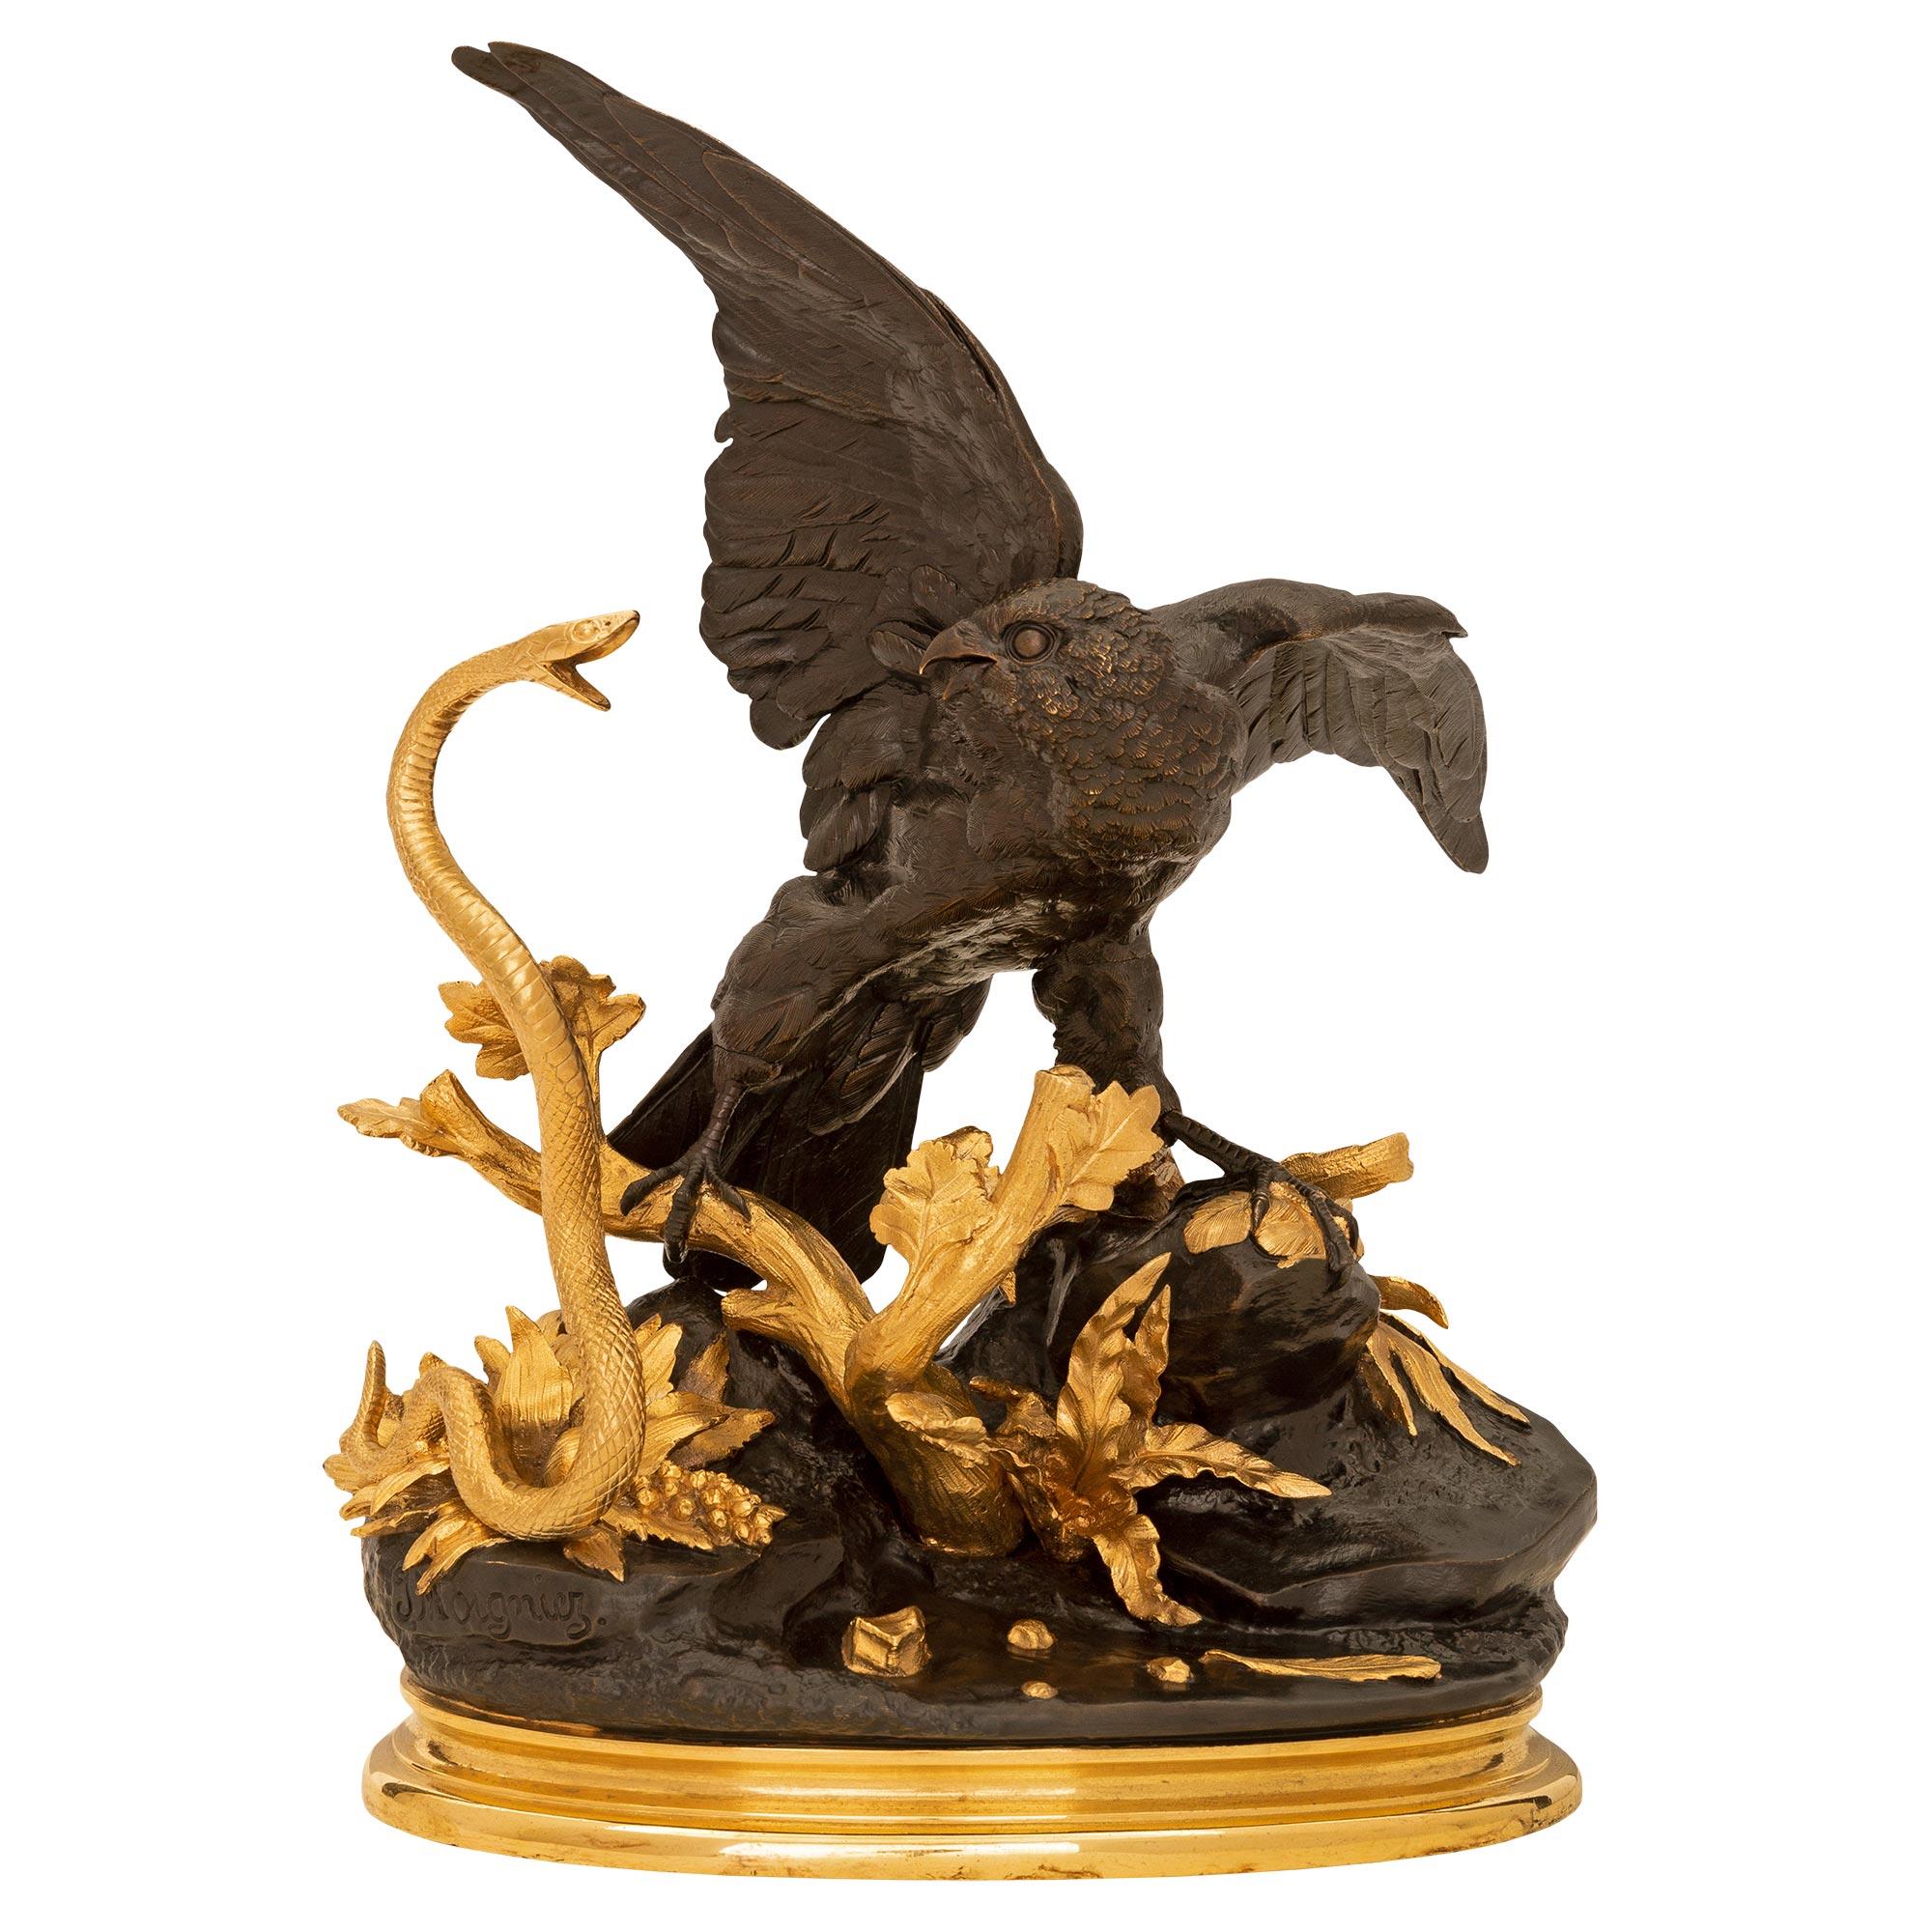 A striking and very high quality French 19th century Louis XVI st. ormolu and patinated bronze statue signed by Jules Moigniez. The statue is raised by an elegant mottled oblong ormolu base below the wonderfully executed patinated bronze ground